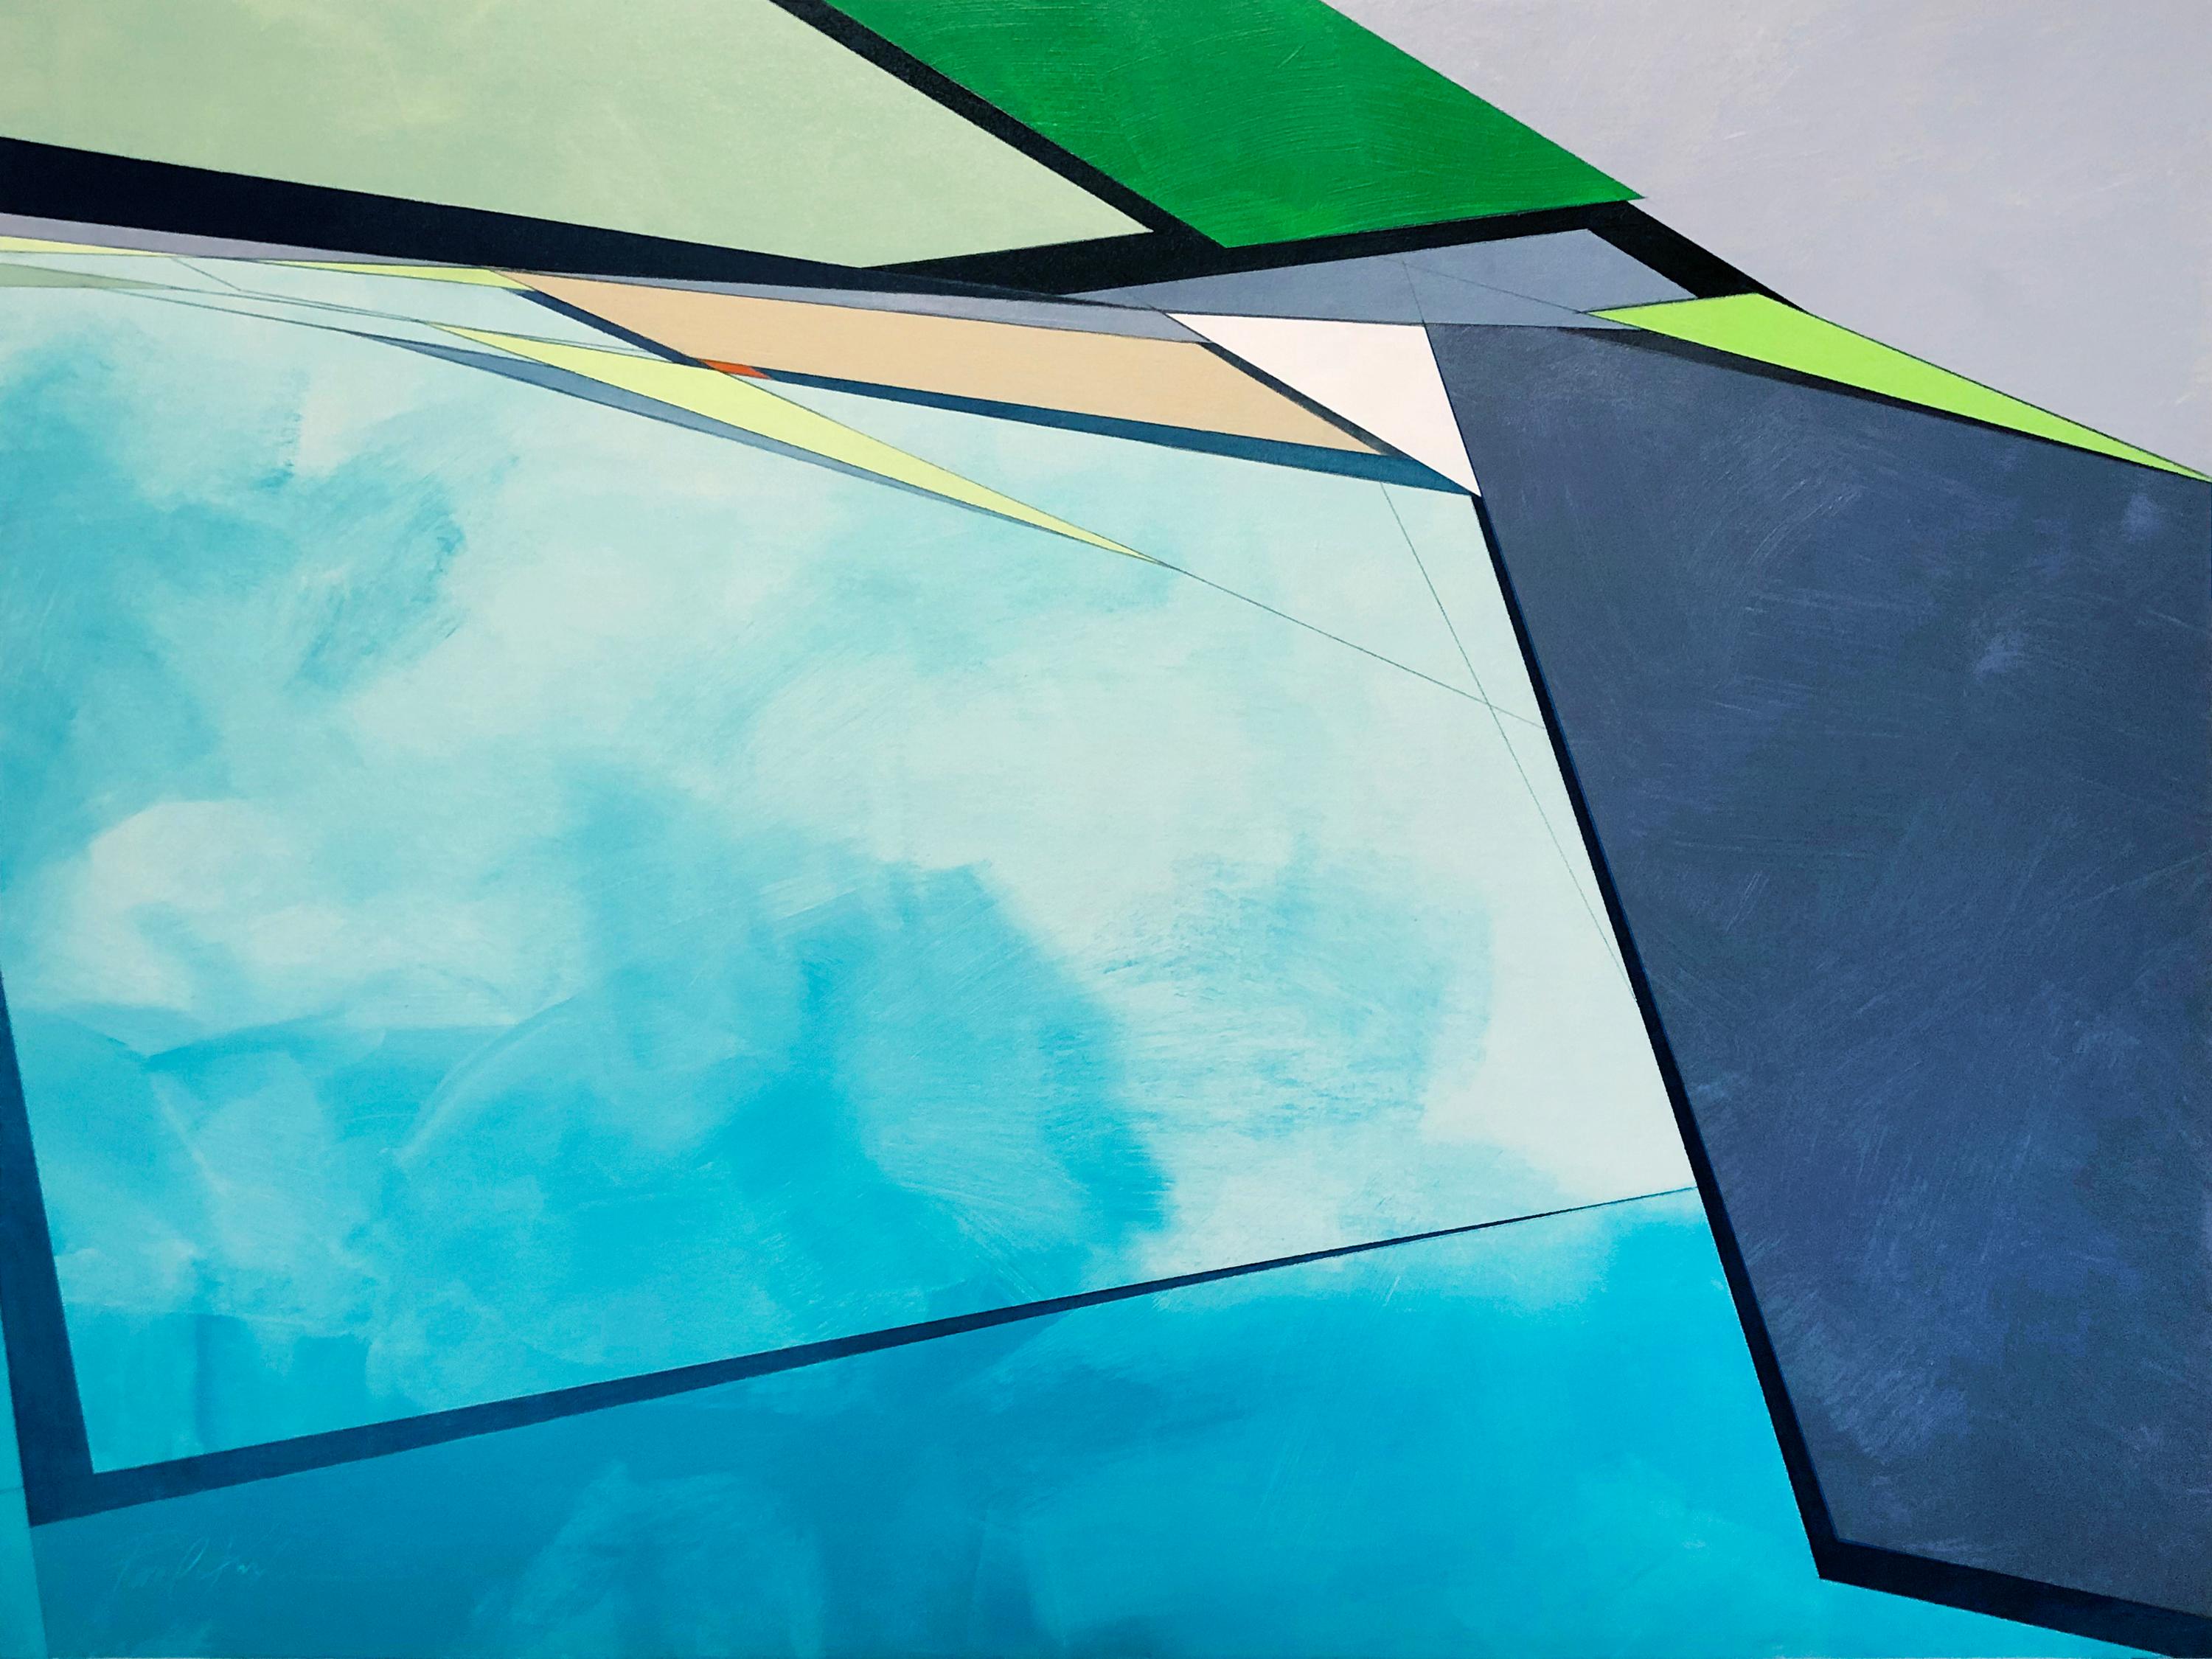 <p>Artist Comments<br>A modernist abstraction drawing on elements of an open and welcoming landscape and big sky. "This piece possesses a clean geometric structure with a perceived low-level relief," explains artist Paul Kirley. "I also wanted to